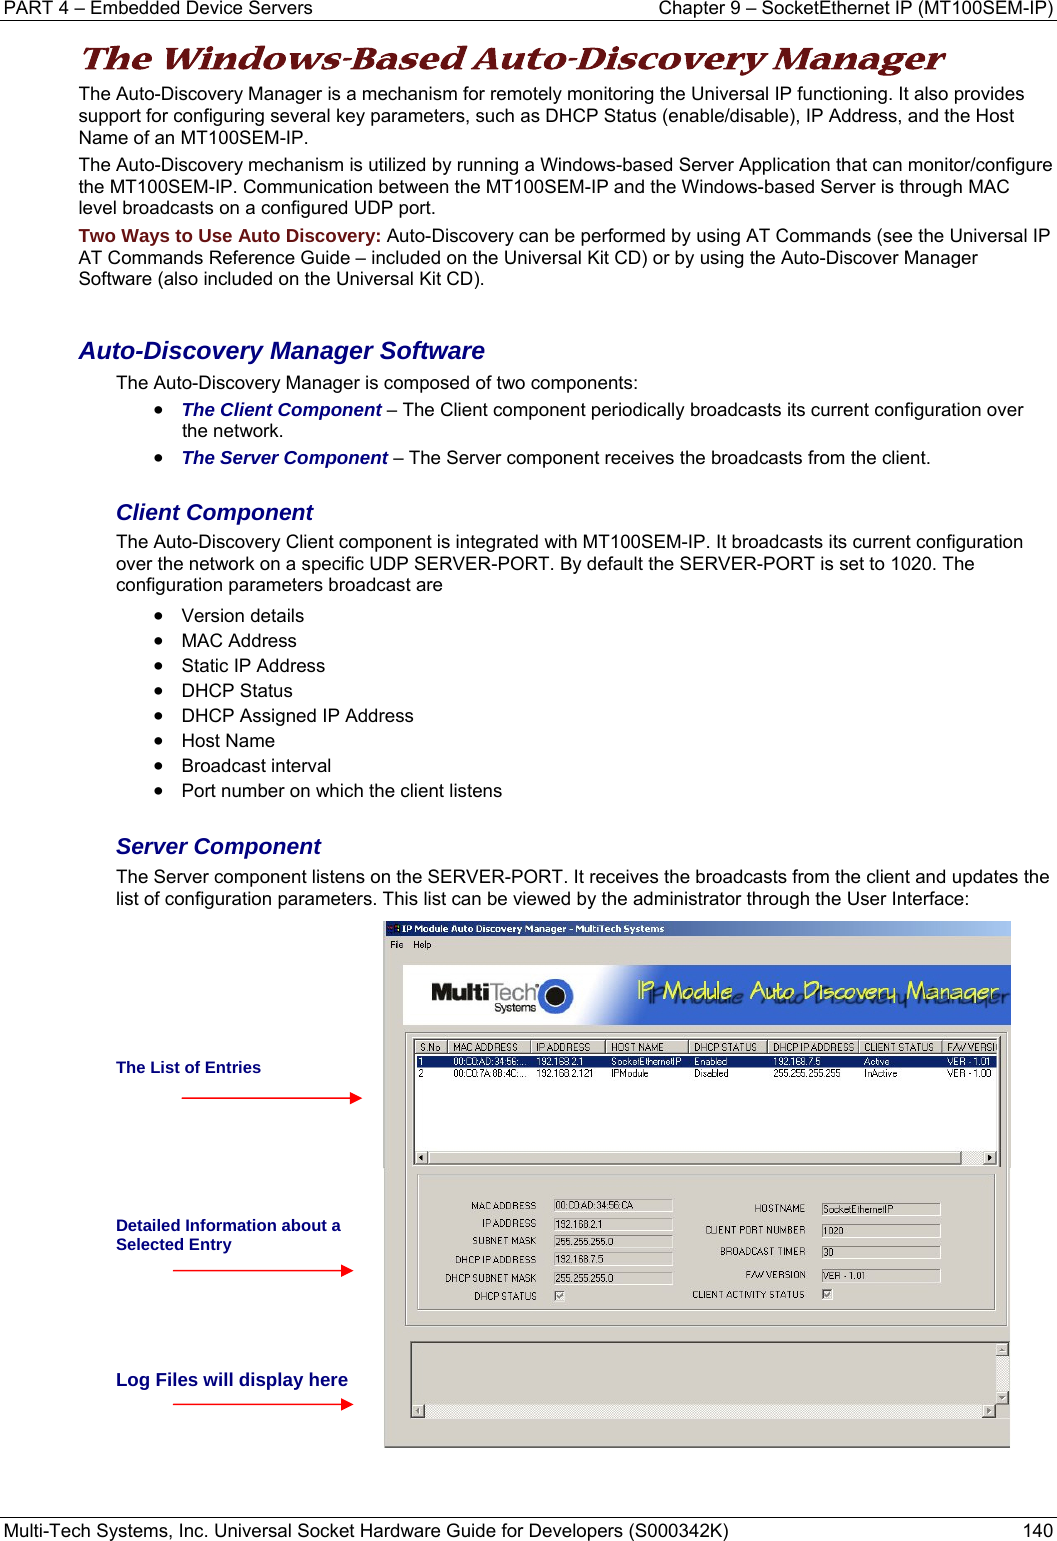 PART 4 – Embedded Device Servers  Chapter 9 – SocketEthernet IP (MT100SEM-IP)  Multi-Tech Systems, Inc. Universal Socket Hardware Guide for Developers (S000342K)  140  The Windows-Based Auto-Discovery Manager  The Auto-Discovery Manager is a mechanism for remotely monitoring the Universal IP functioning. It also provides support for configuring several key parameters, such as DHCP Status (enable/disable), IP Address, and the Host Name of an MT100SEM-IP.  The Auto-Discovery mechanism is utilized by running a Windows-based Server Application that can monitor/configure the MT100SEM-IP. Communication between the MT100SEM-IP and the Windows-based Server is through MAC level broadcasts on a configured UDP port. Two Ways to Use Auto Discovery: Auto-Discovery can be performed by using AT Commands (see the Universal IP AT Commands Reference Guide – included on the Universal Kit CD) or by using the Auto-Discover Manager Software (also included on the Universal Kit CD).  Auto-Discovery Manager Software The Auto-Discovery Manager is composed of two components: • The Client Component – The Client component periodically broadcasts its current configuration over the network. • The Server Component – The Server component receives the broadcasts from the client.  Client Component The Auto-Discovery Client component is integrated with MT100SEM-IP. It broadcasts its current configuration over the network on a specific UDP SERVER-PORT. By default the SERVER-PORT is set to 1020. The configuration parameters broadcast are  • Version details • MAC Address • Static IP Address • DHCP Status • DHCP Assigned IP Address • Host Name • Broadcast interval • Port number on which the client listens  Server Component The Server component listens on the SERVER-PORT. It receives the broadcasts from the client and updates the list of configuration parameters. This list can be viewed by the administrator through the User Interface:      The List of Entries     Detailed Information about a Selected Entry    Log Files will display here    